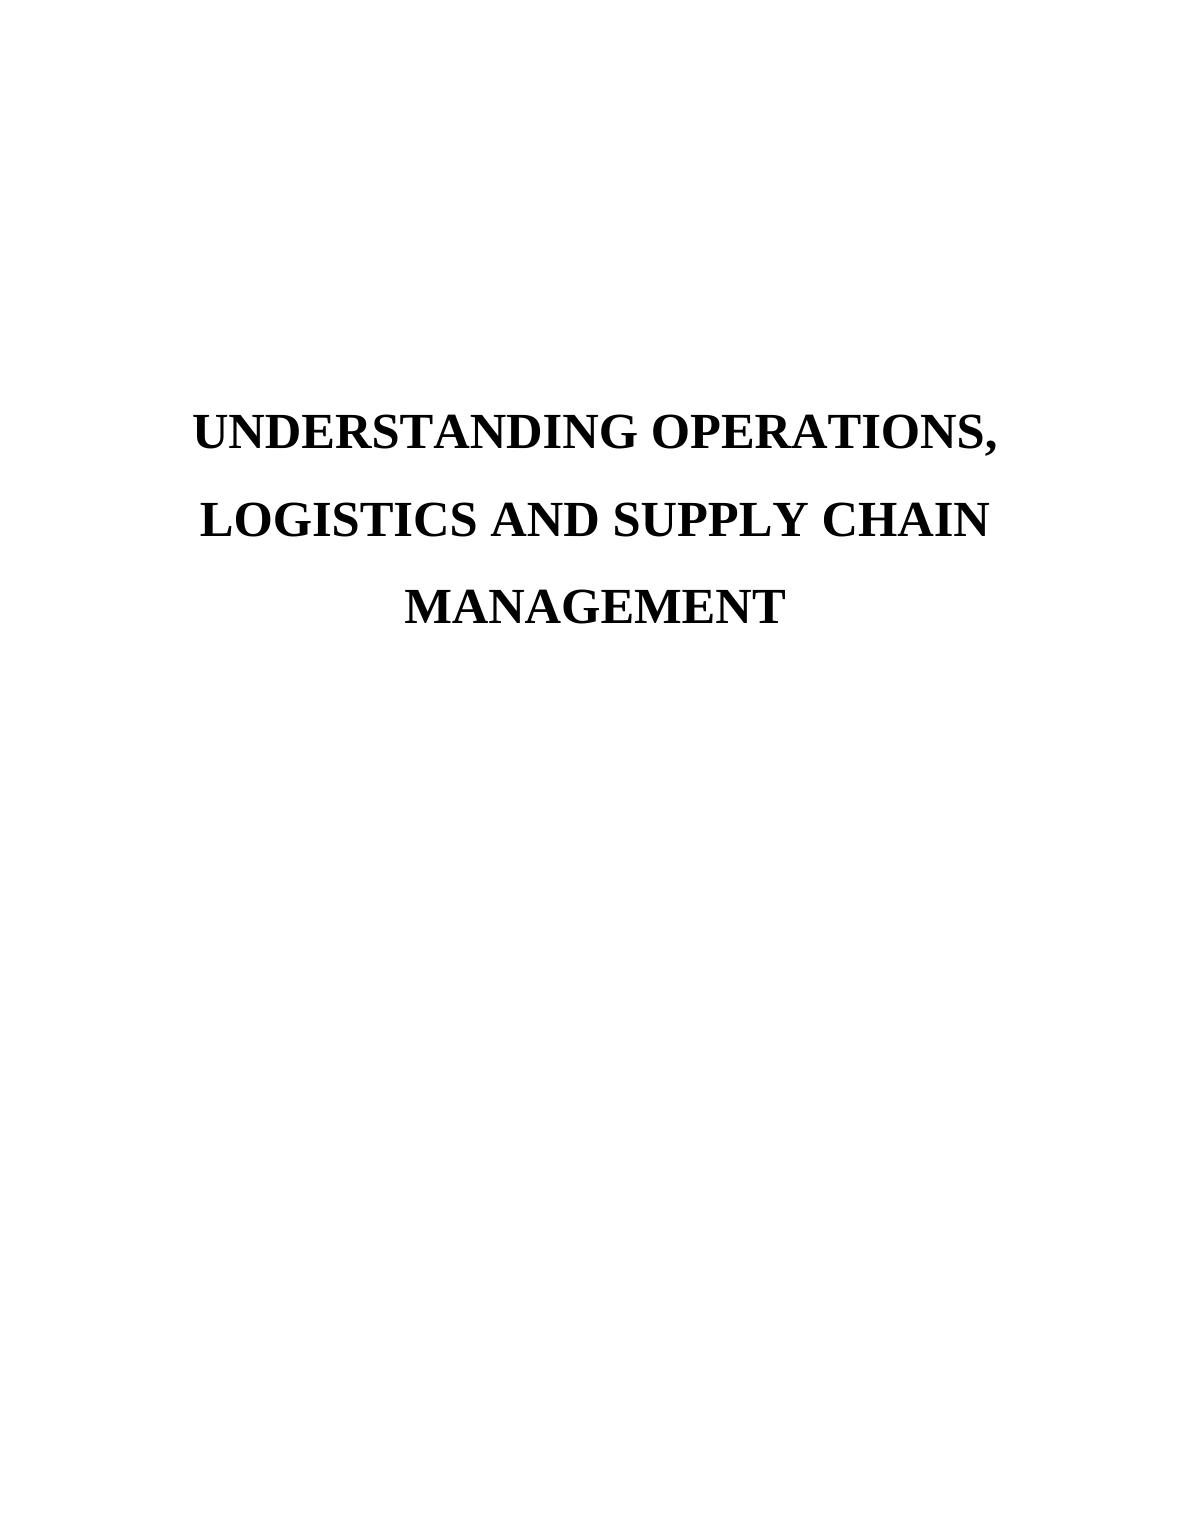 Operations Management of Logistics and Supply Chain Management_1